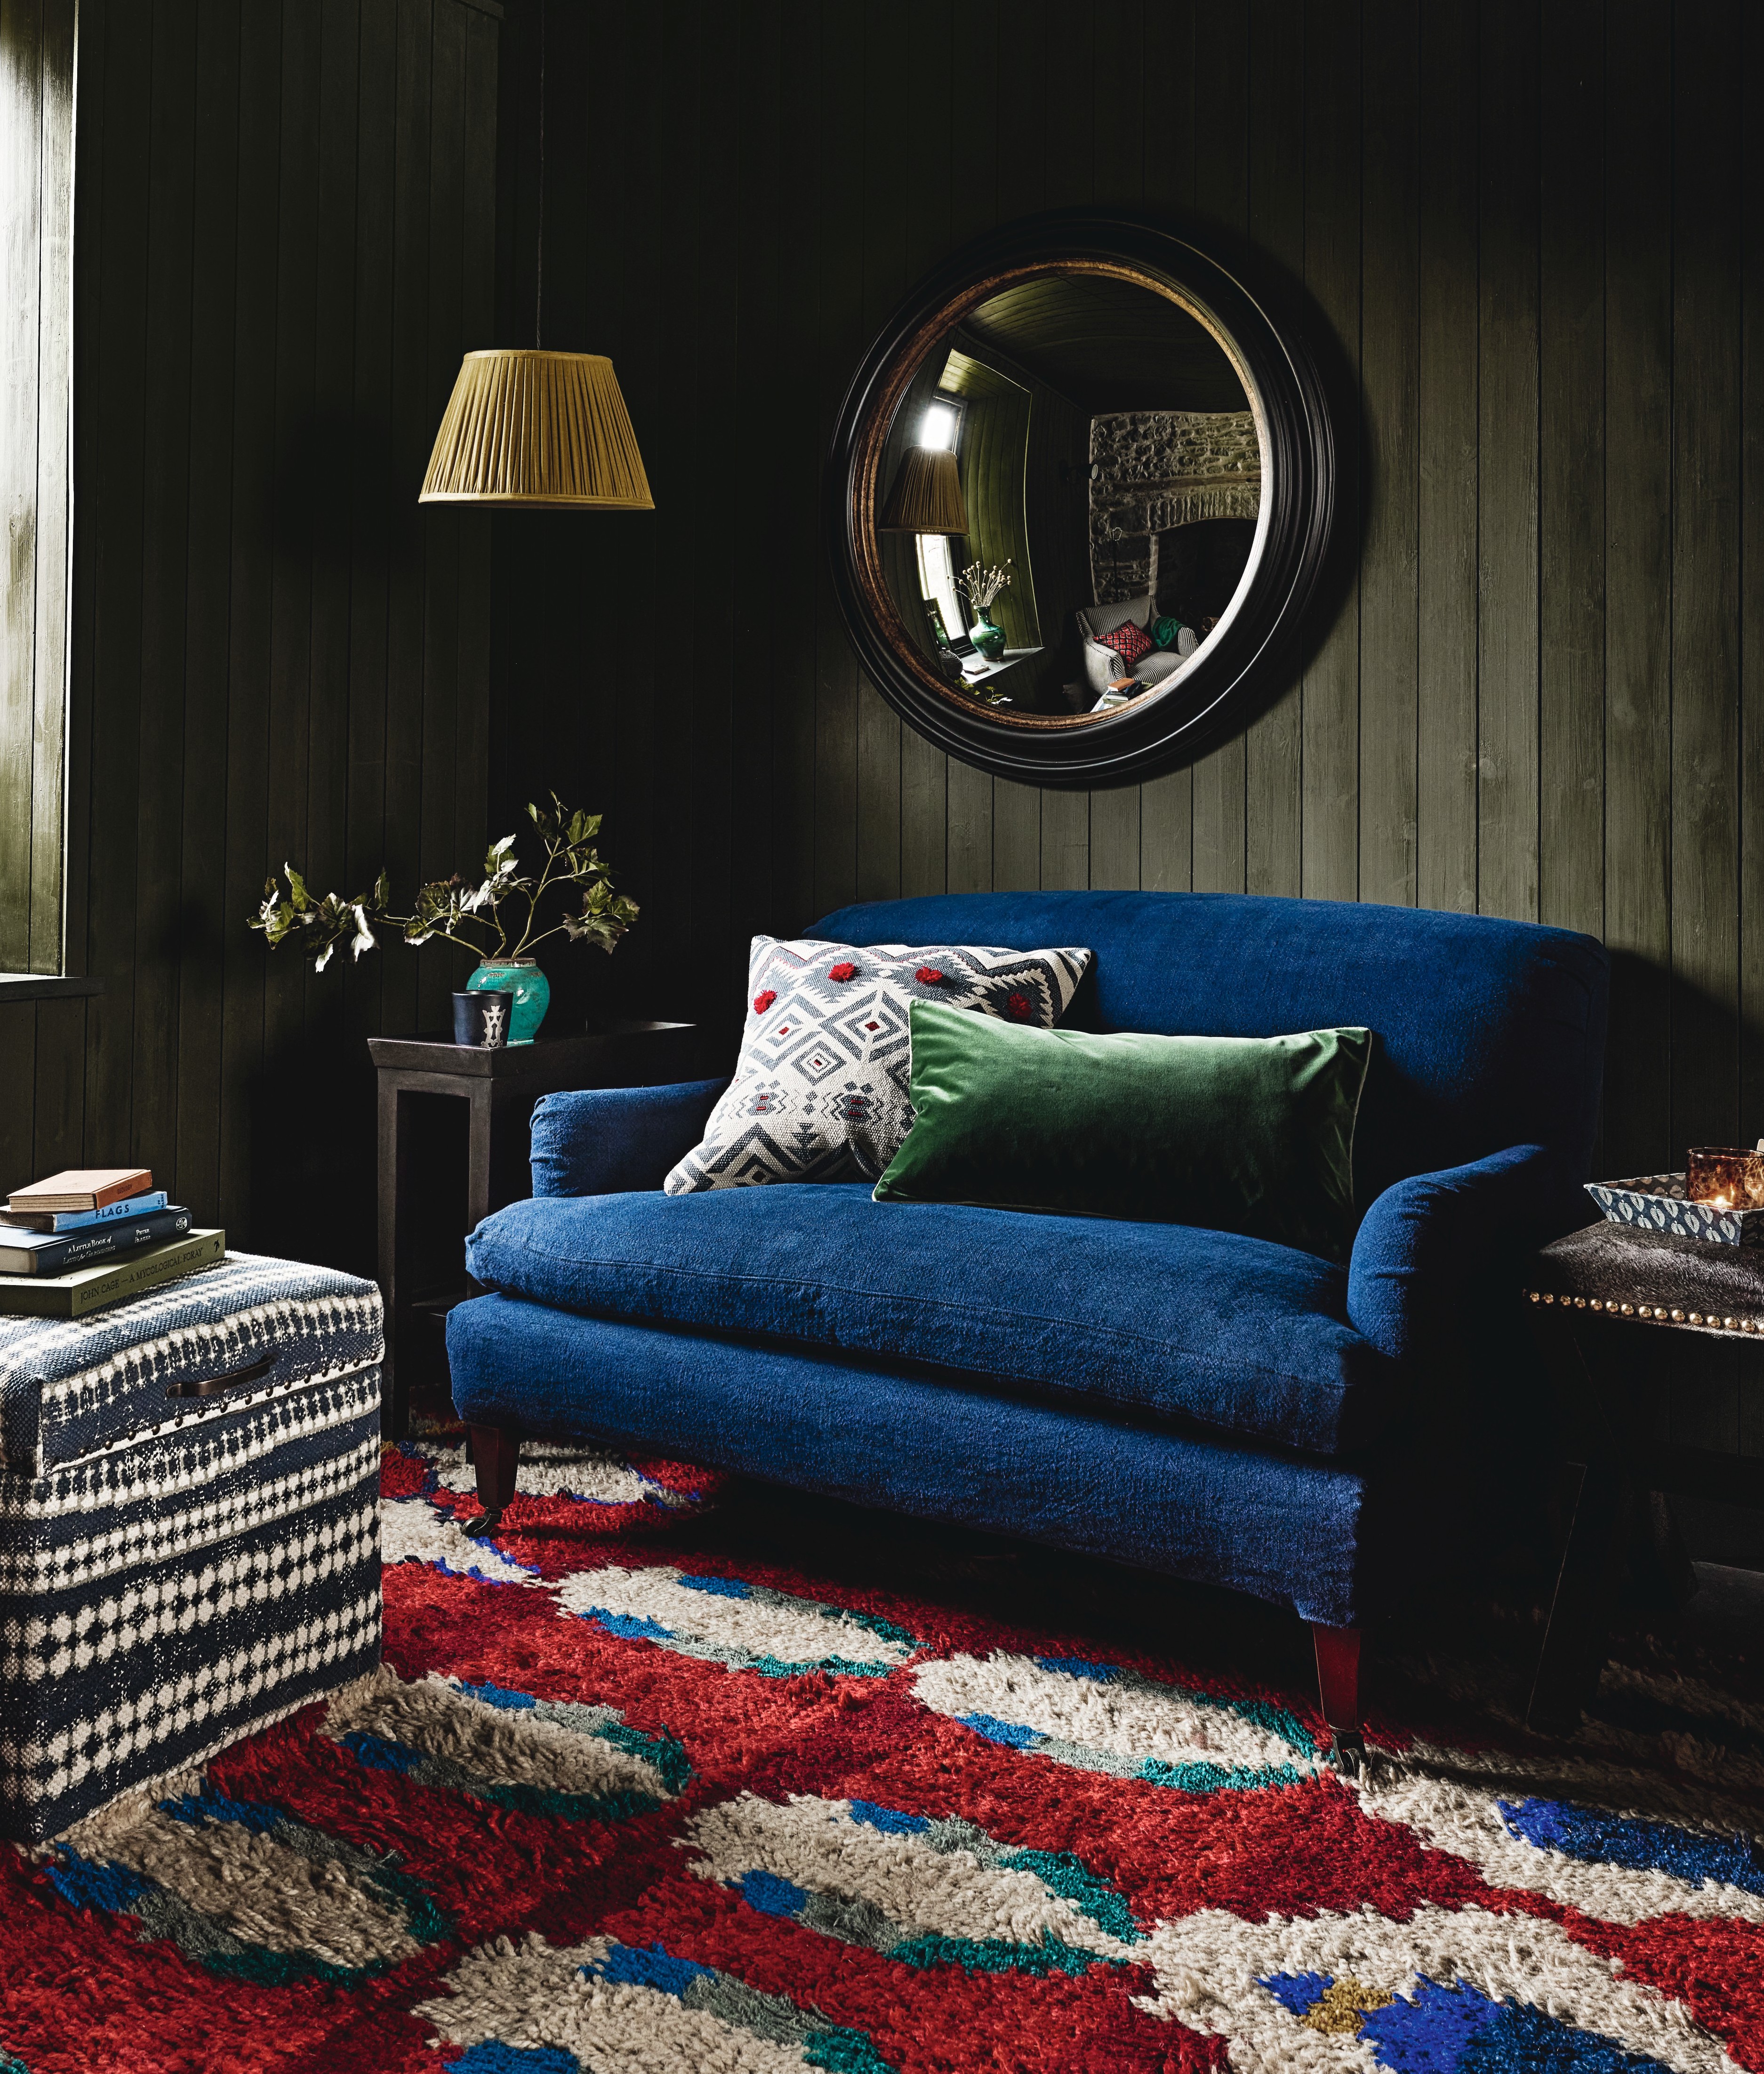 living room with green painted shiplap, blue couch, red, blue and white couch, pouffe, table lamps, pendant light, mirror